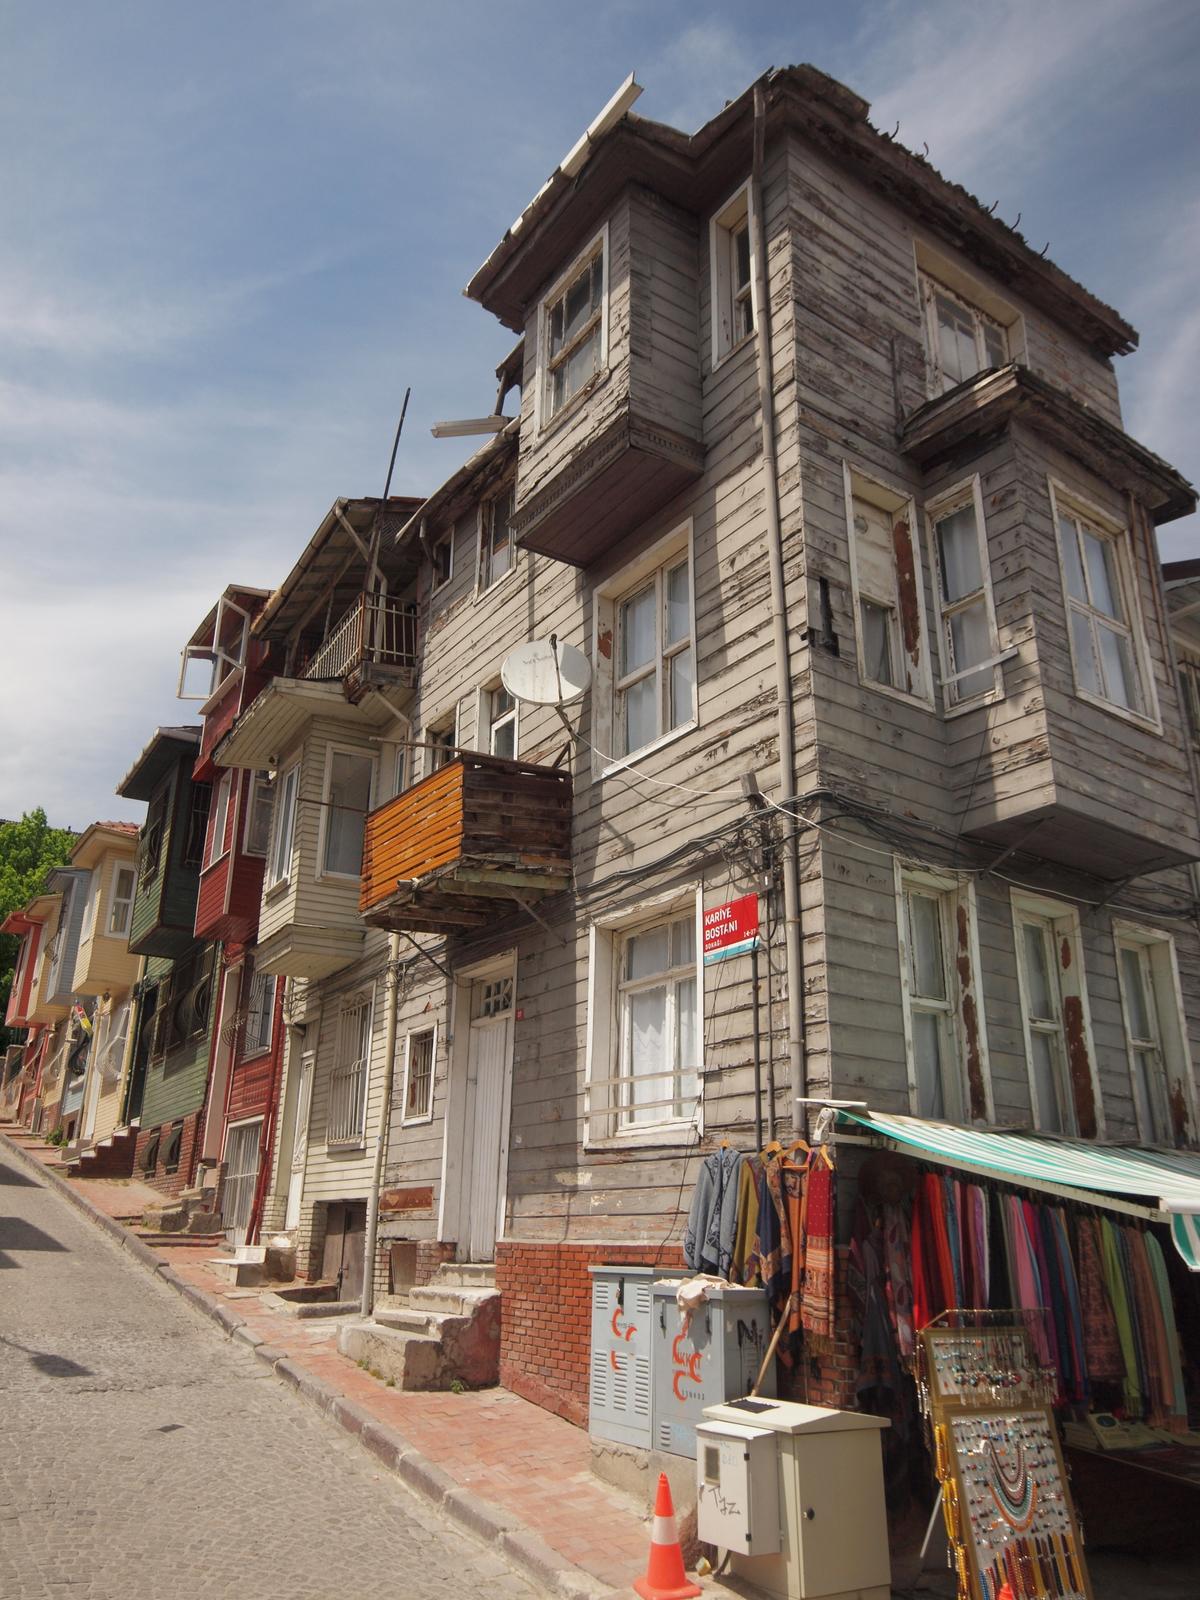 Old wooden Ottoman Period houses, some of them restored. (Kevin Revolinski)